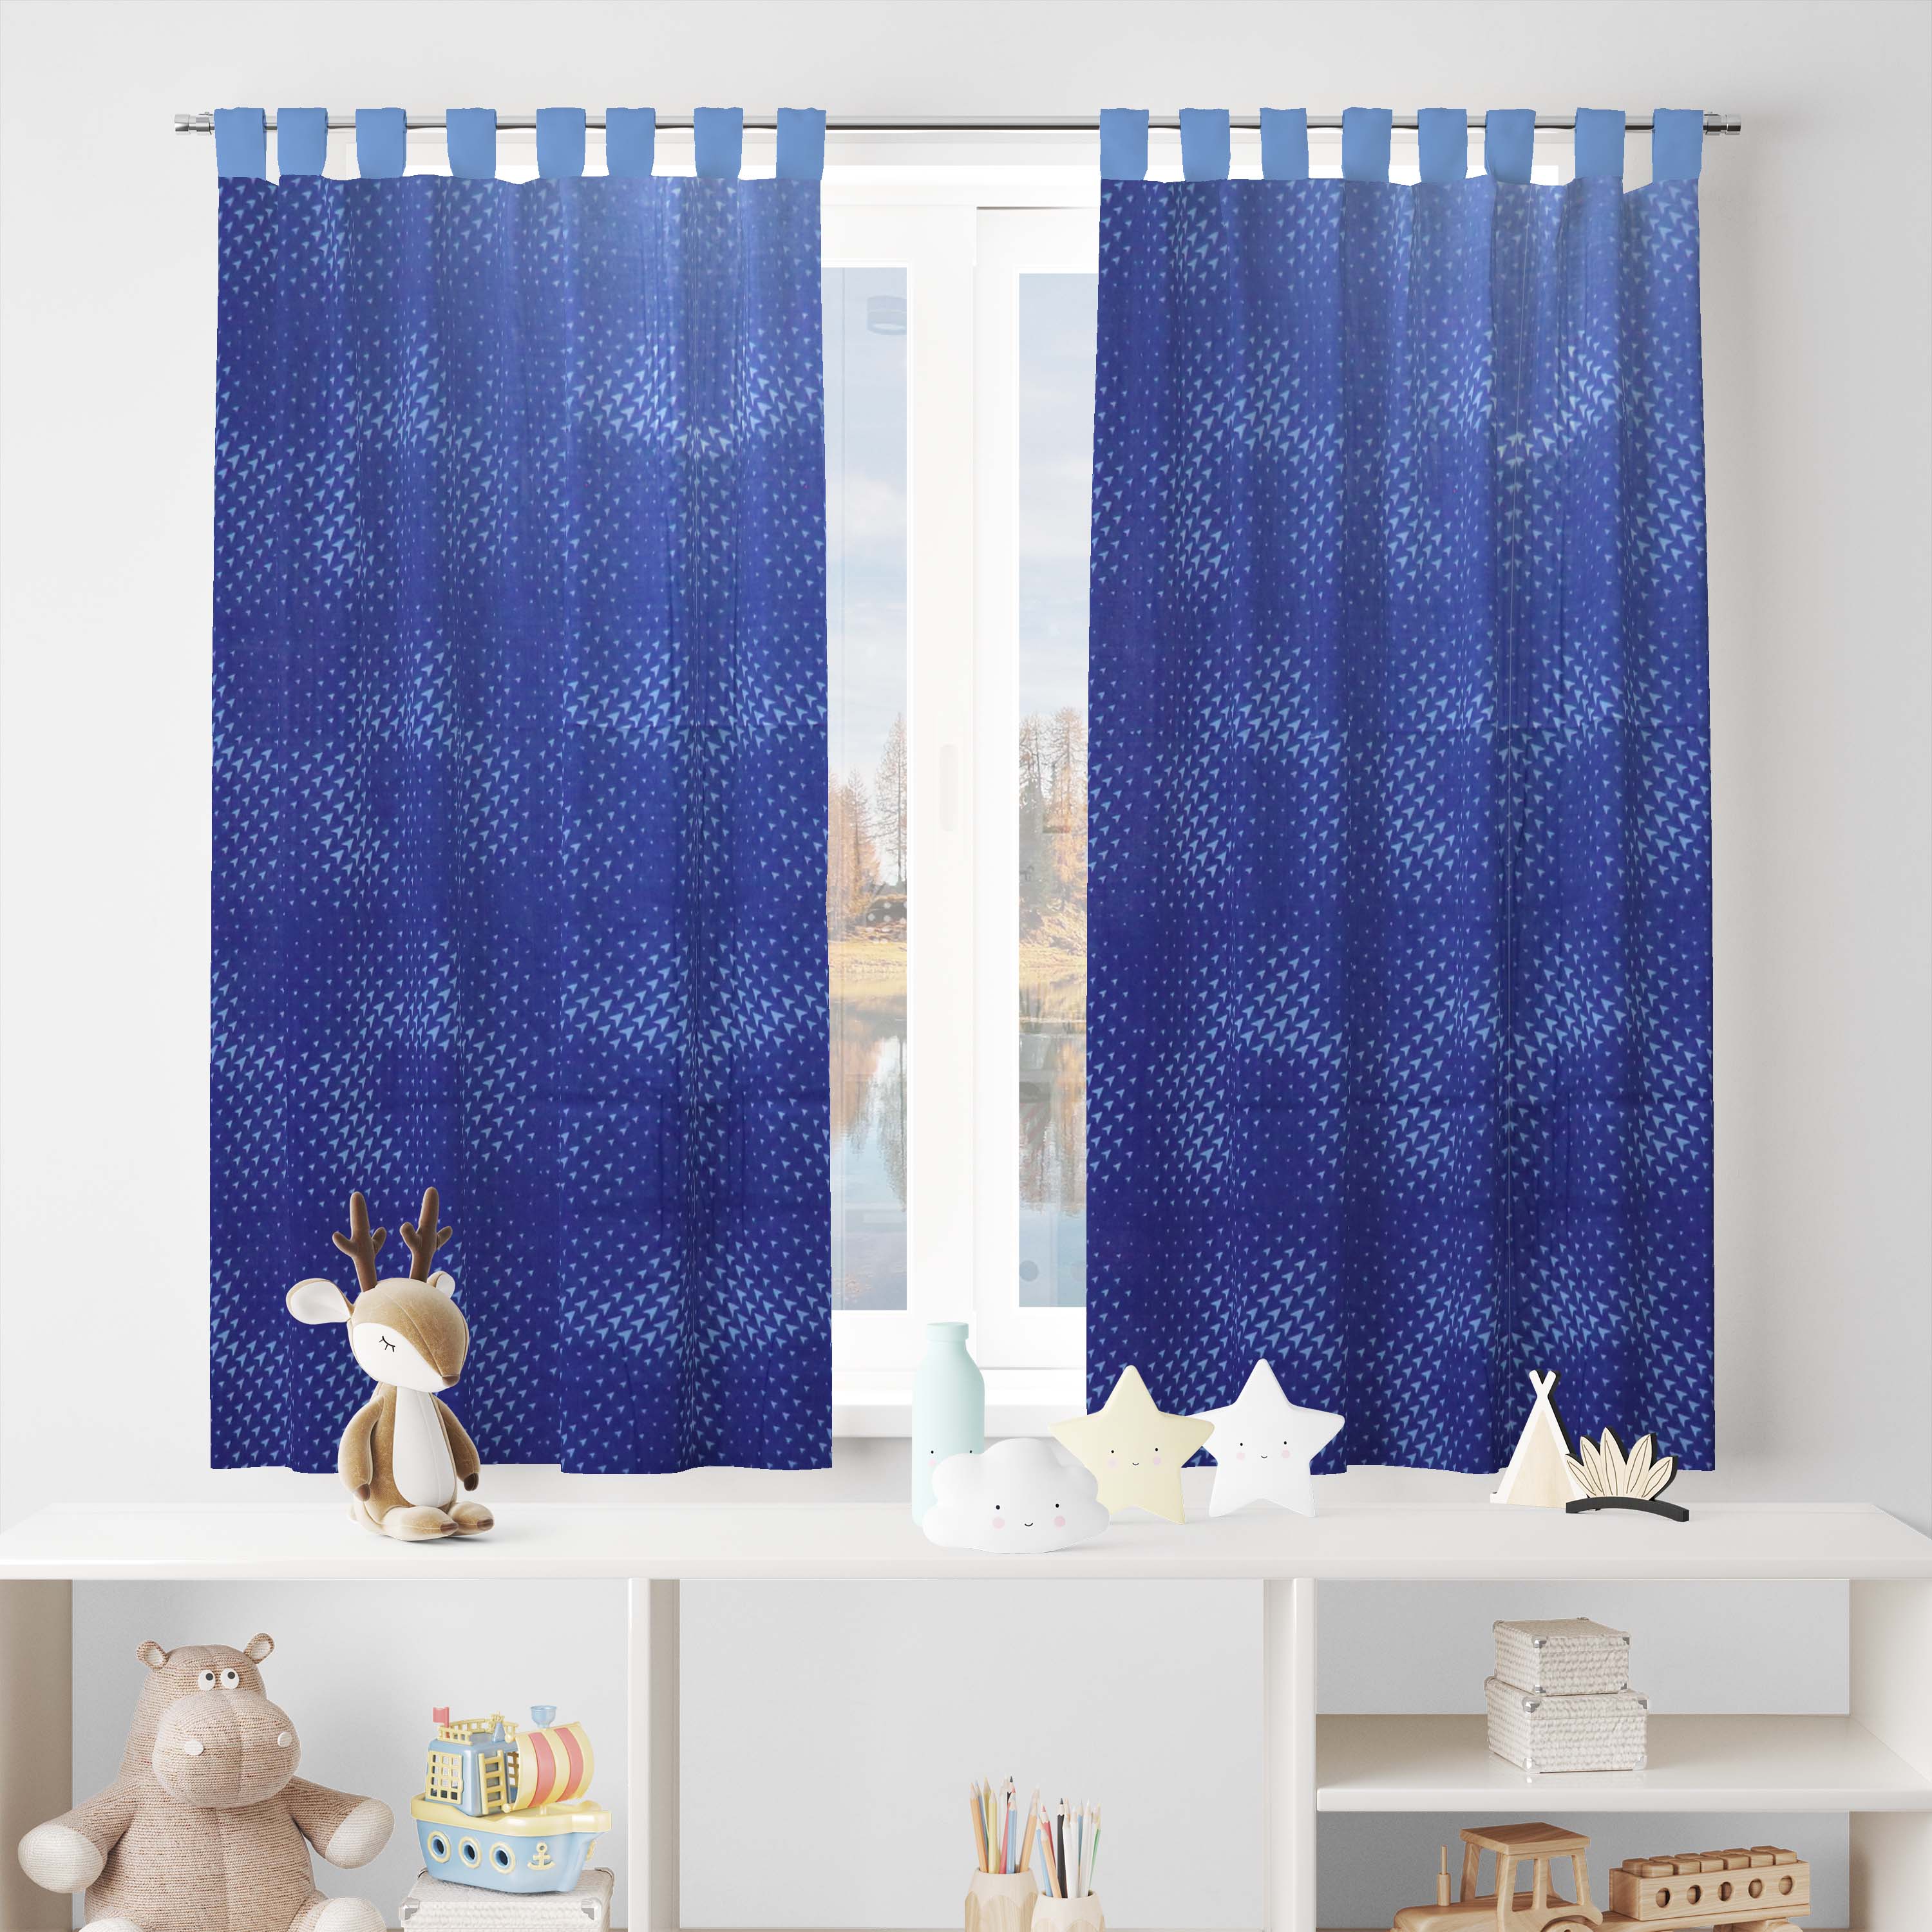 Blue Geometry Cotton Curtain for Windows and Door